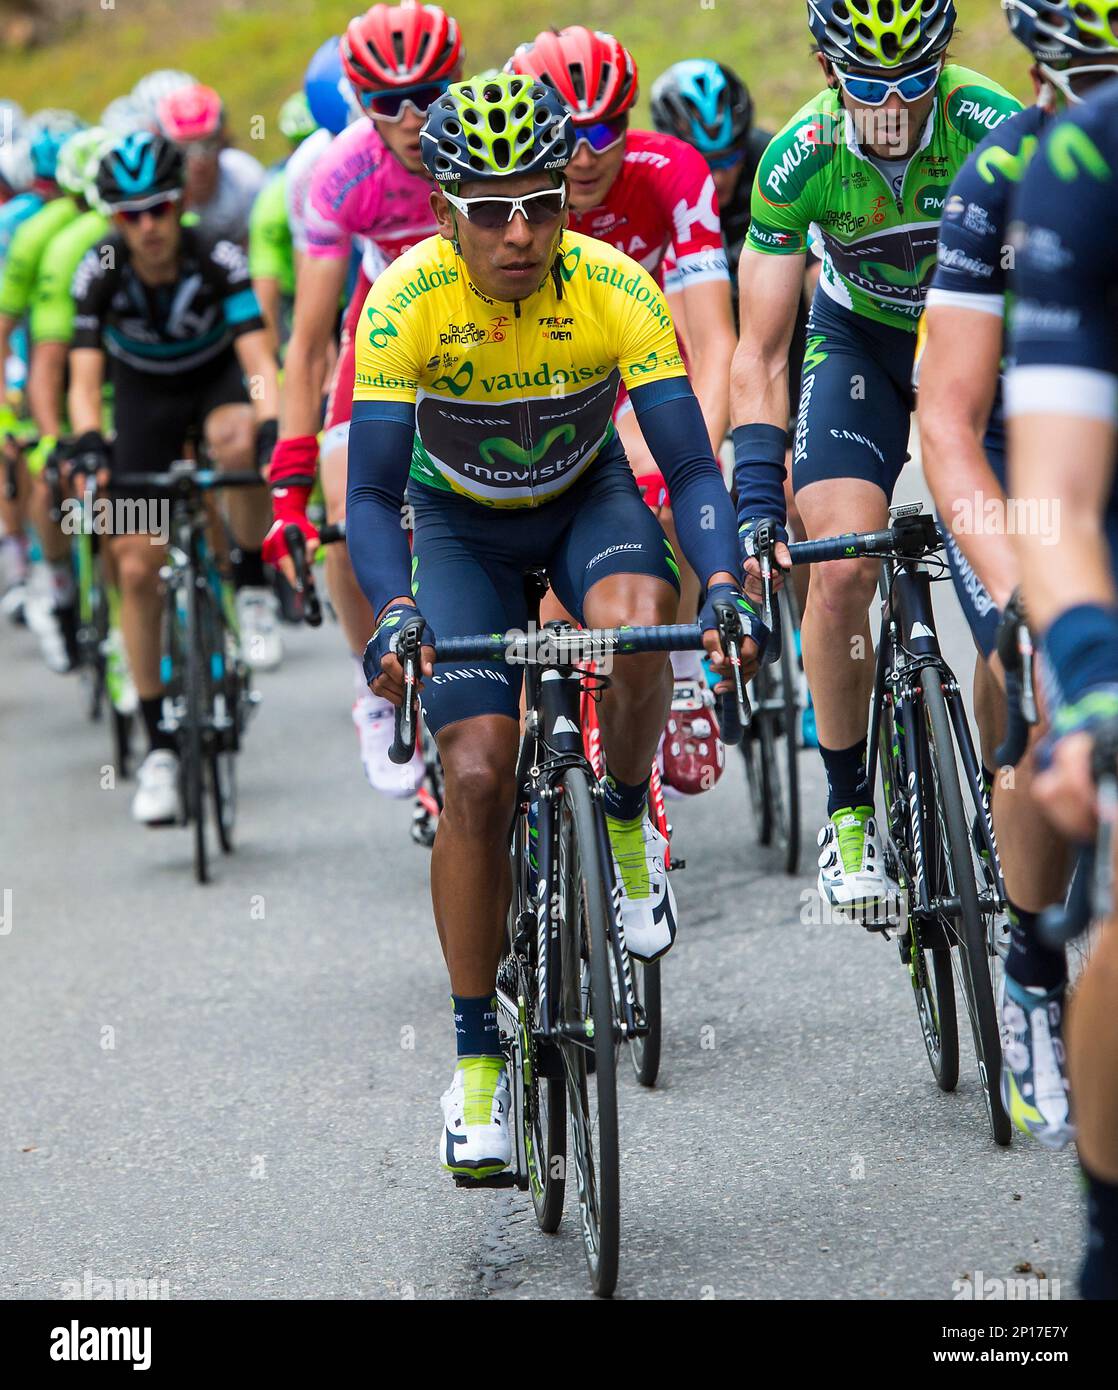 FILE - In this file photo dated Saturday, April 30, 2016, the overall  leader Nairo Quintana from Colombia of team Movistar, in yellow jersey,  rides with the pack during the 70th Tour